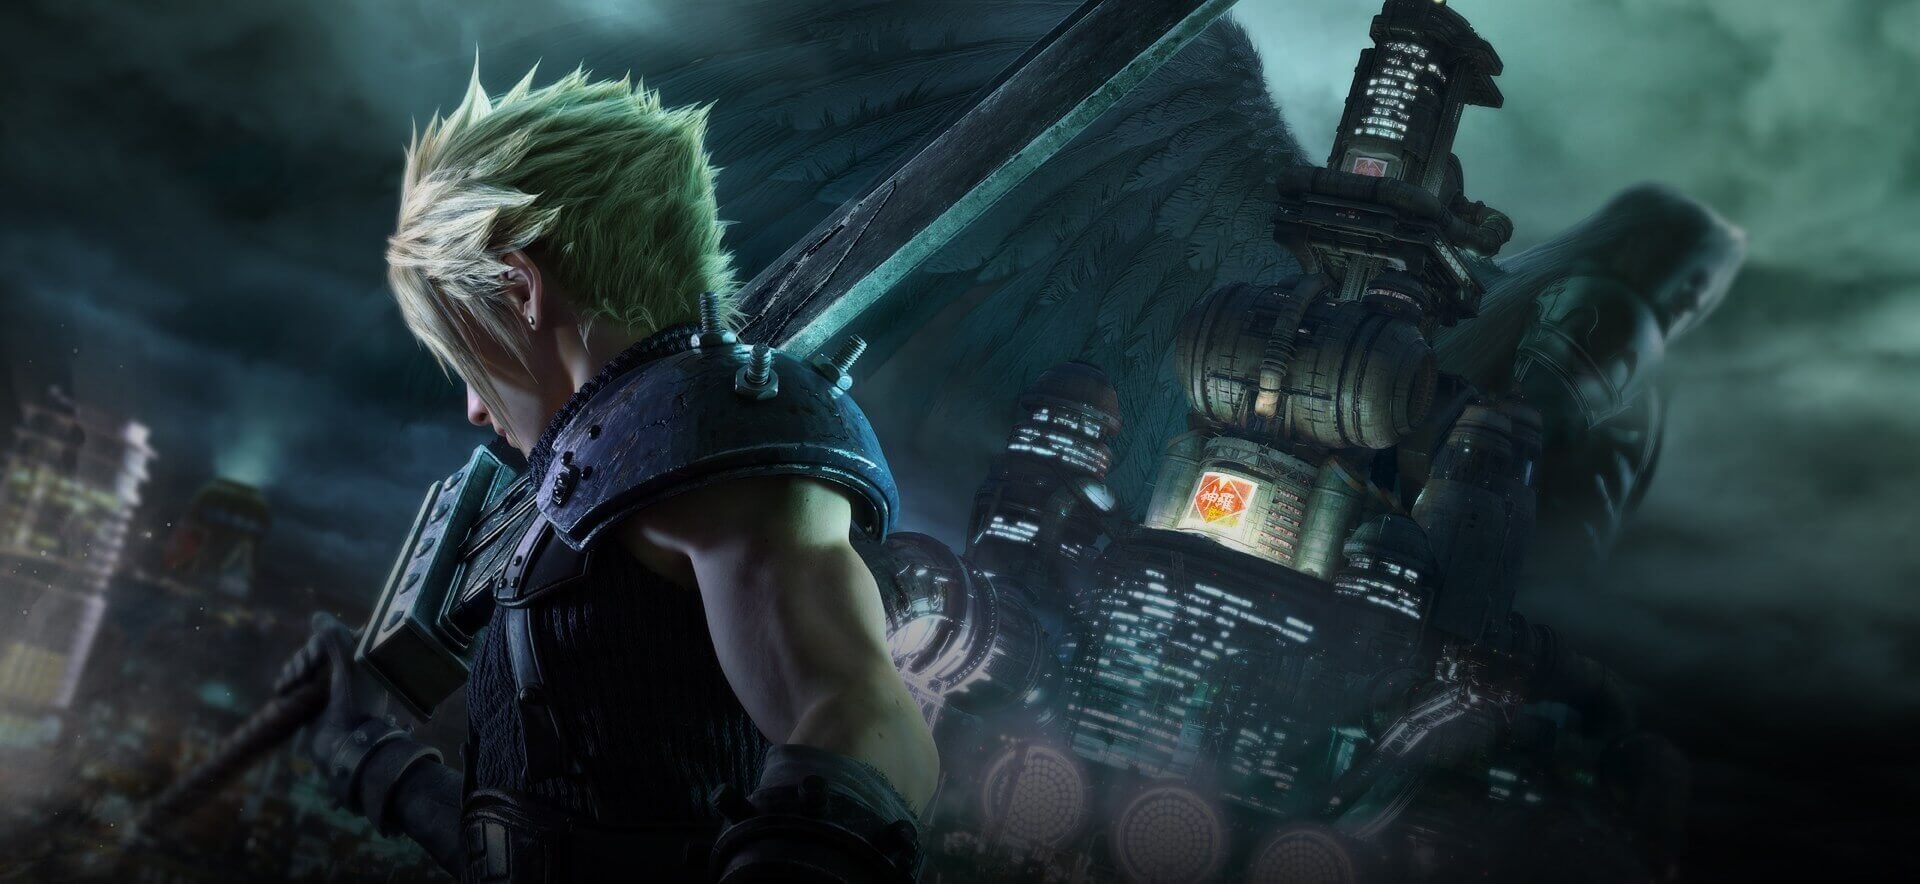 Final Fantasy VII Remake theme song trailer features cross-dressing Cloud